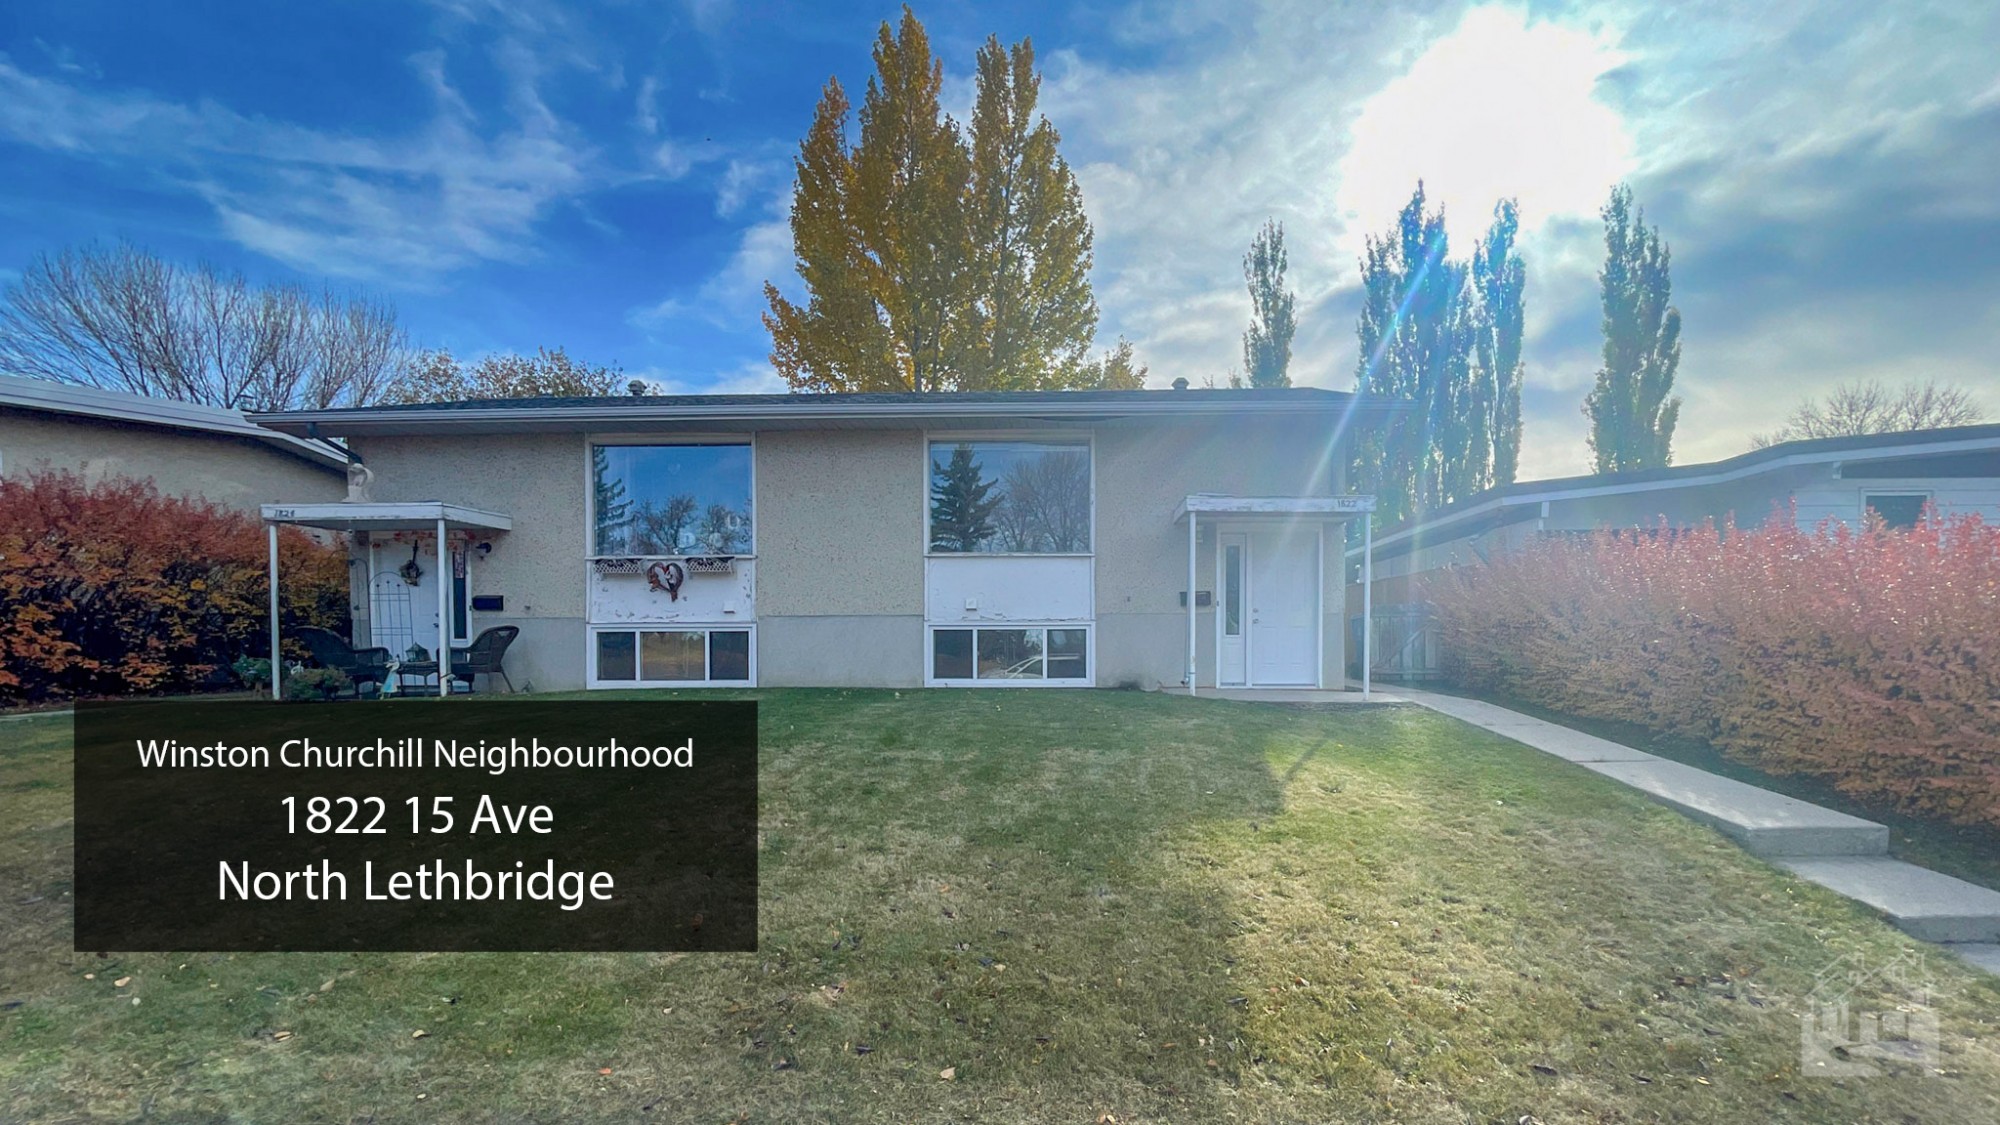 1822 15 Ave North Lethbridge Cover image